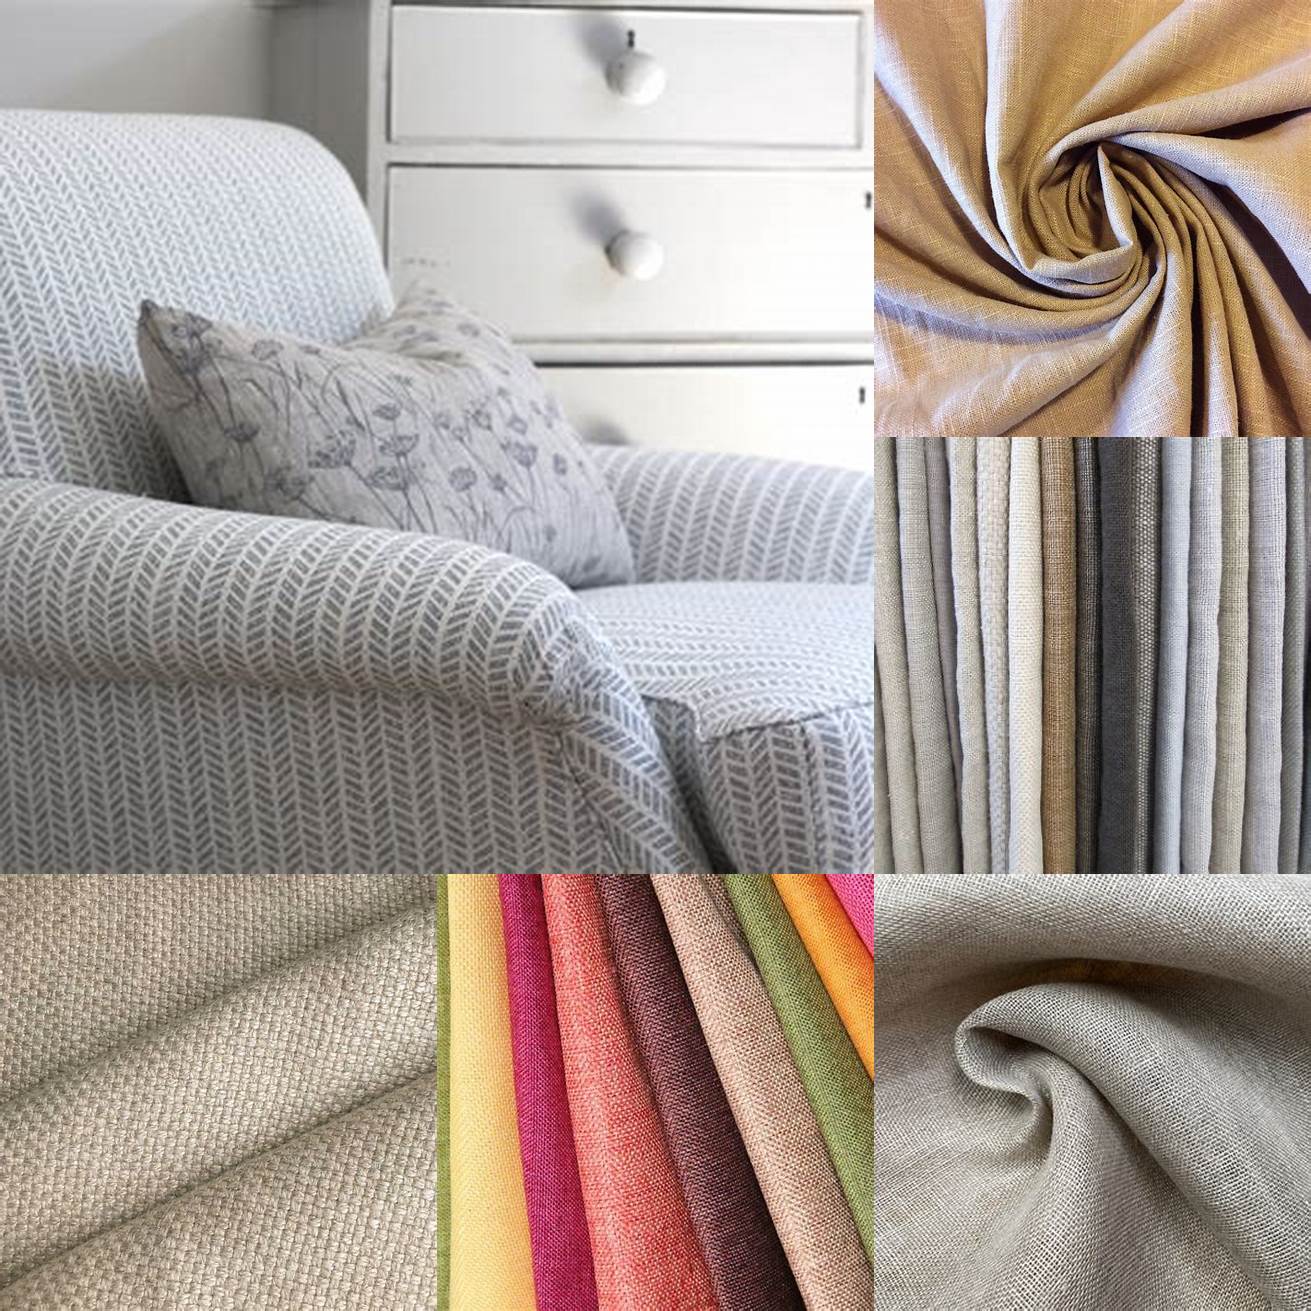 Linen - Linen upholstery is lightweight and breathable making it a good choice for those who live in warmer climates